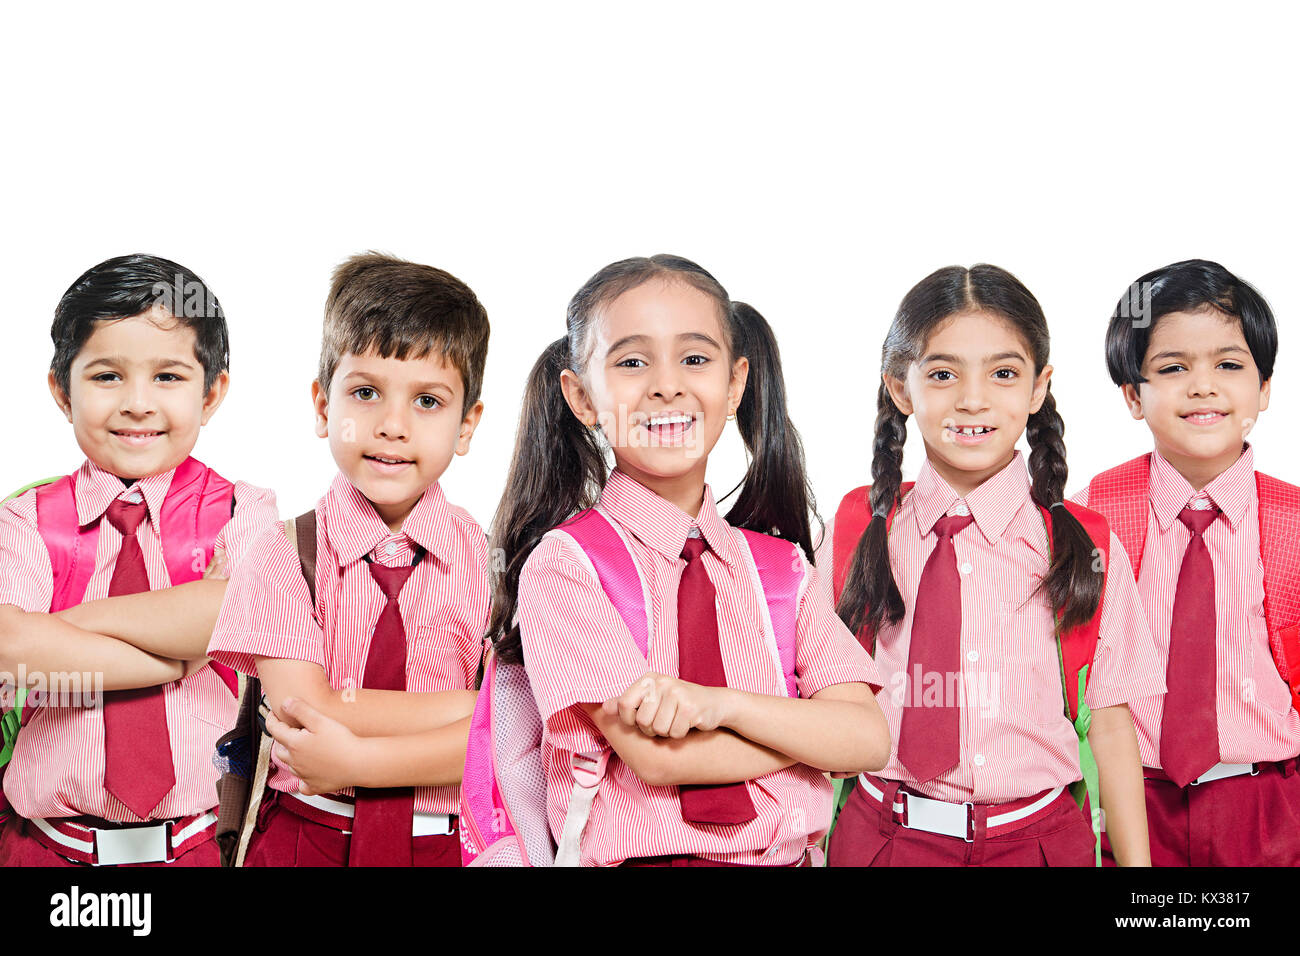 Happy Indian School Kids Boys And Girls Students Standing Together Stock Photo